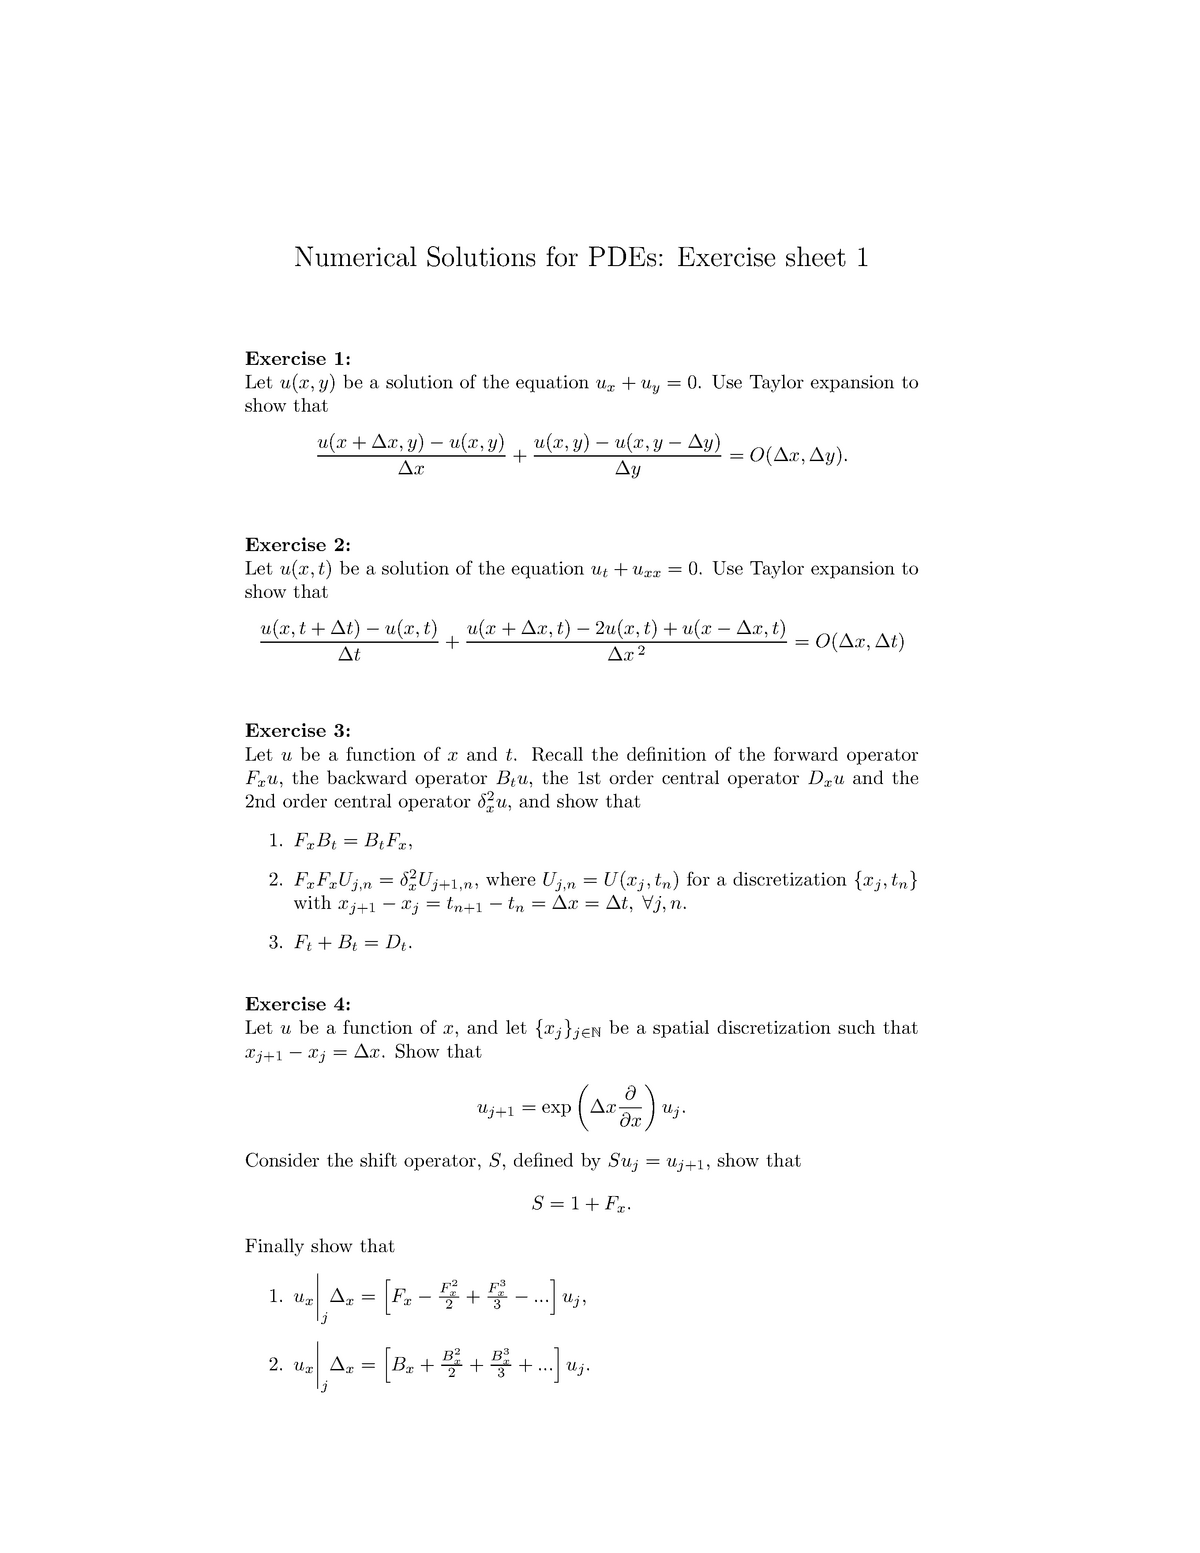 mat3015-2011-2012-exercise-sheet-1-numerical-solutions-for-pdes